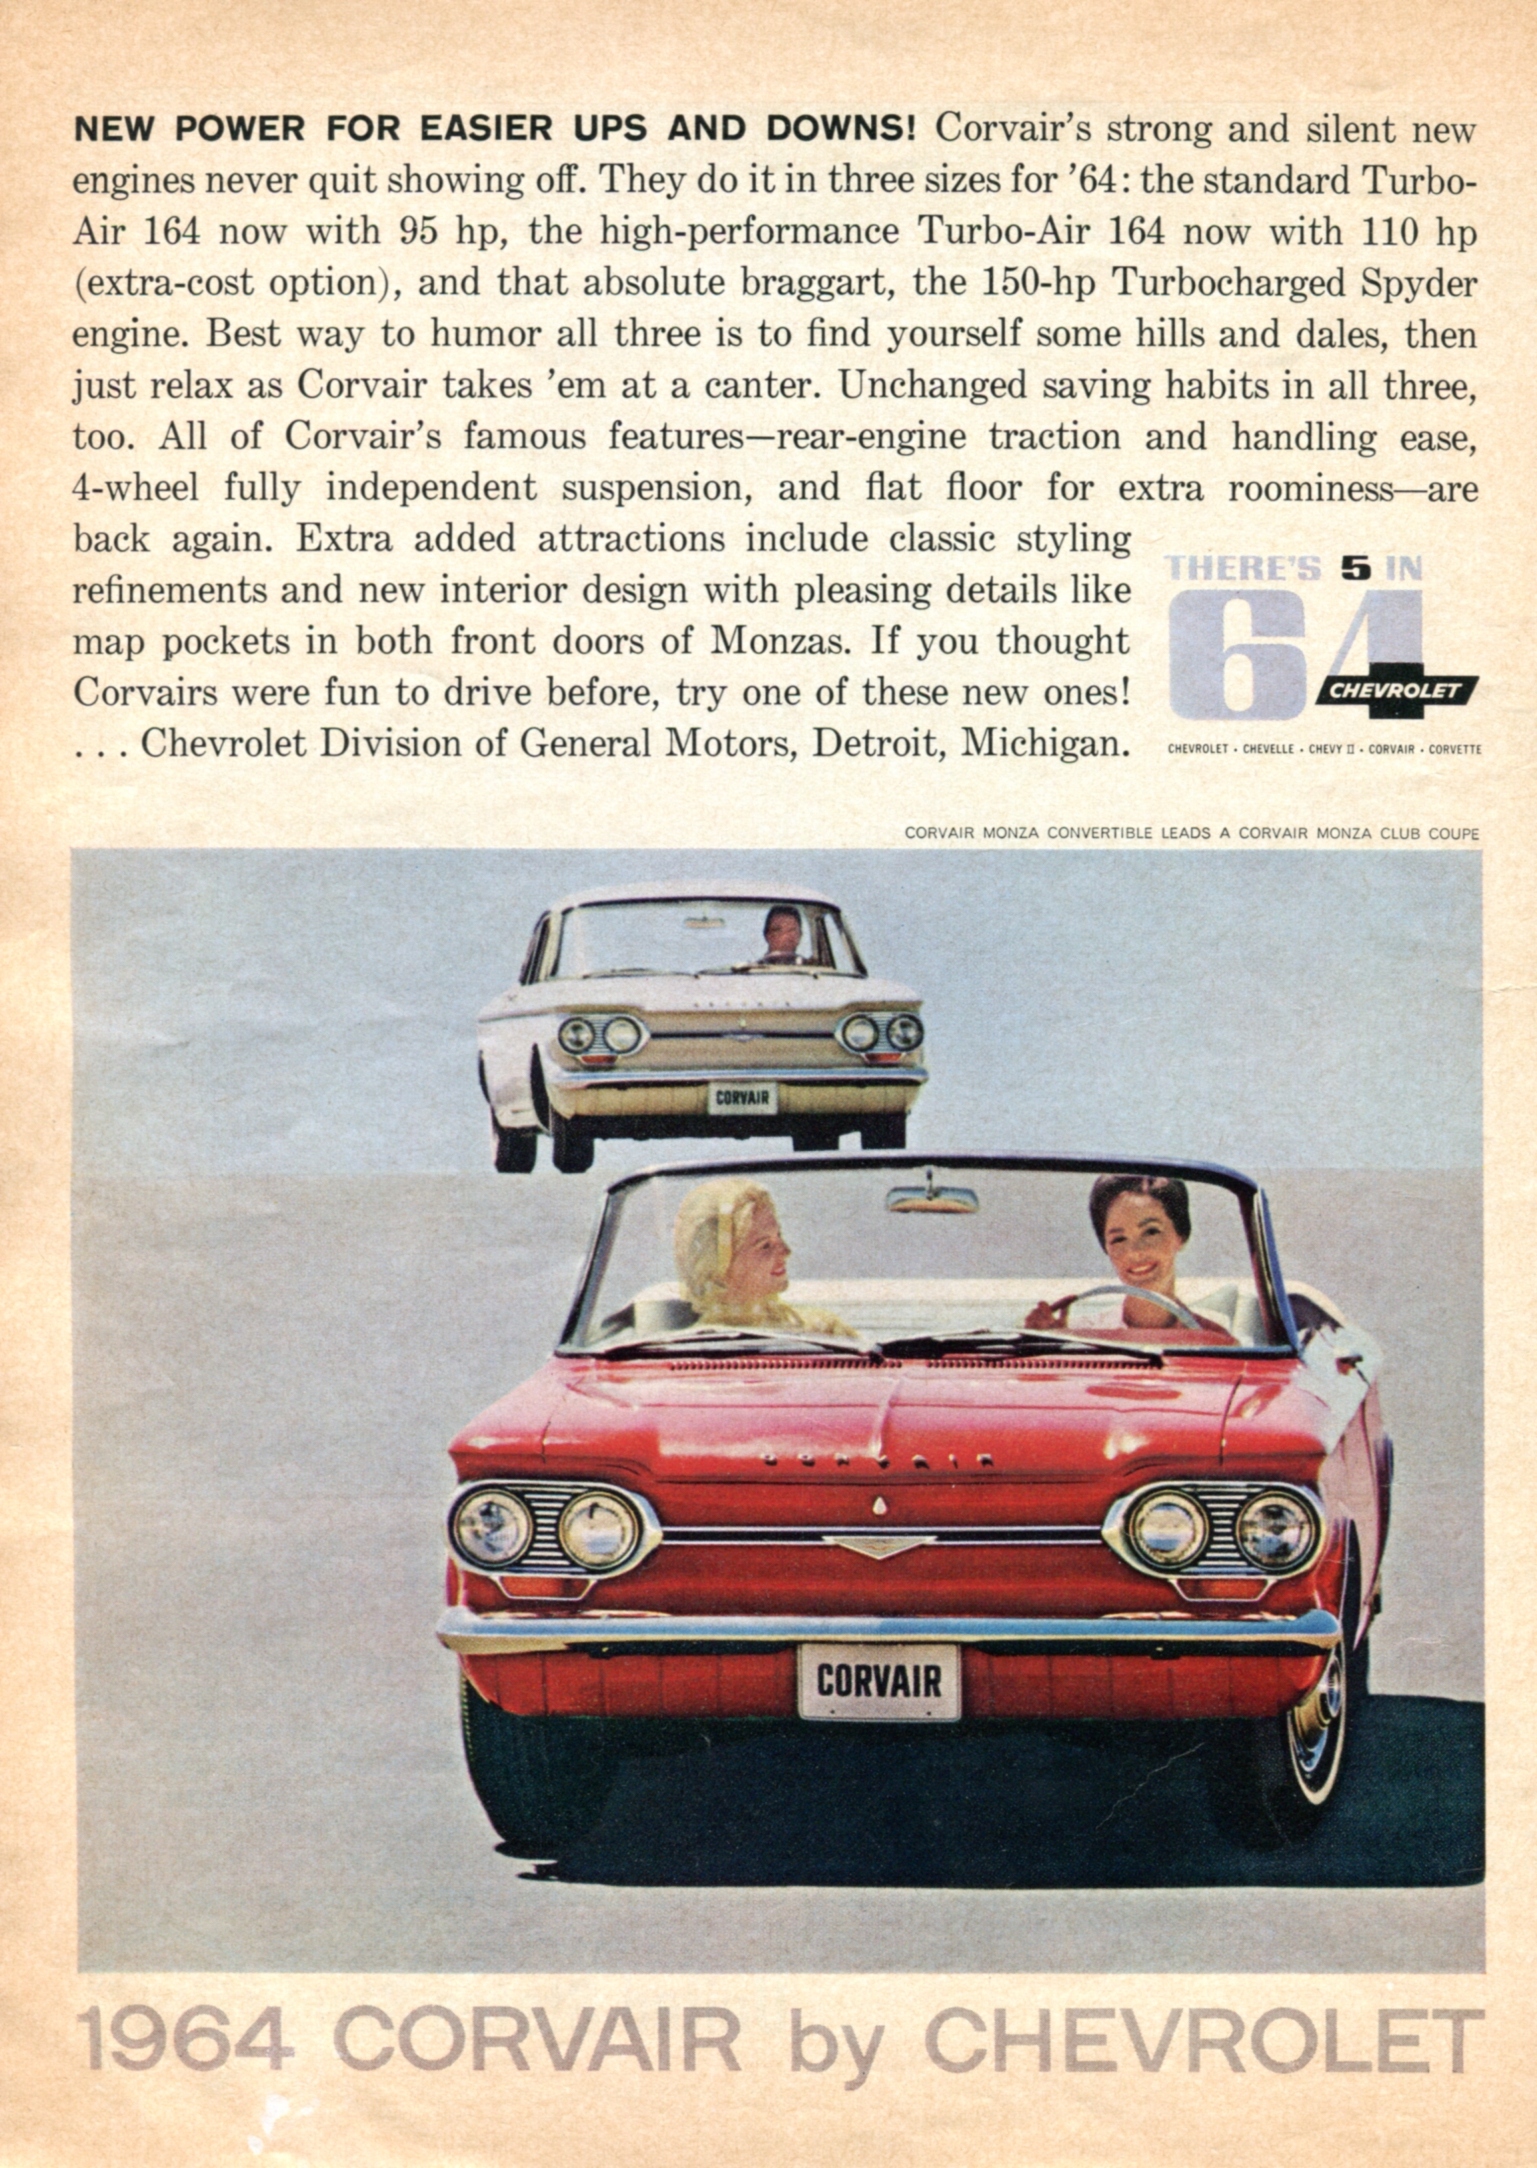 an ad for the chevrolet century convertible is featured in this picture